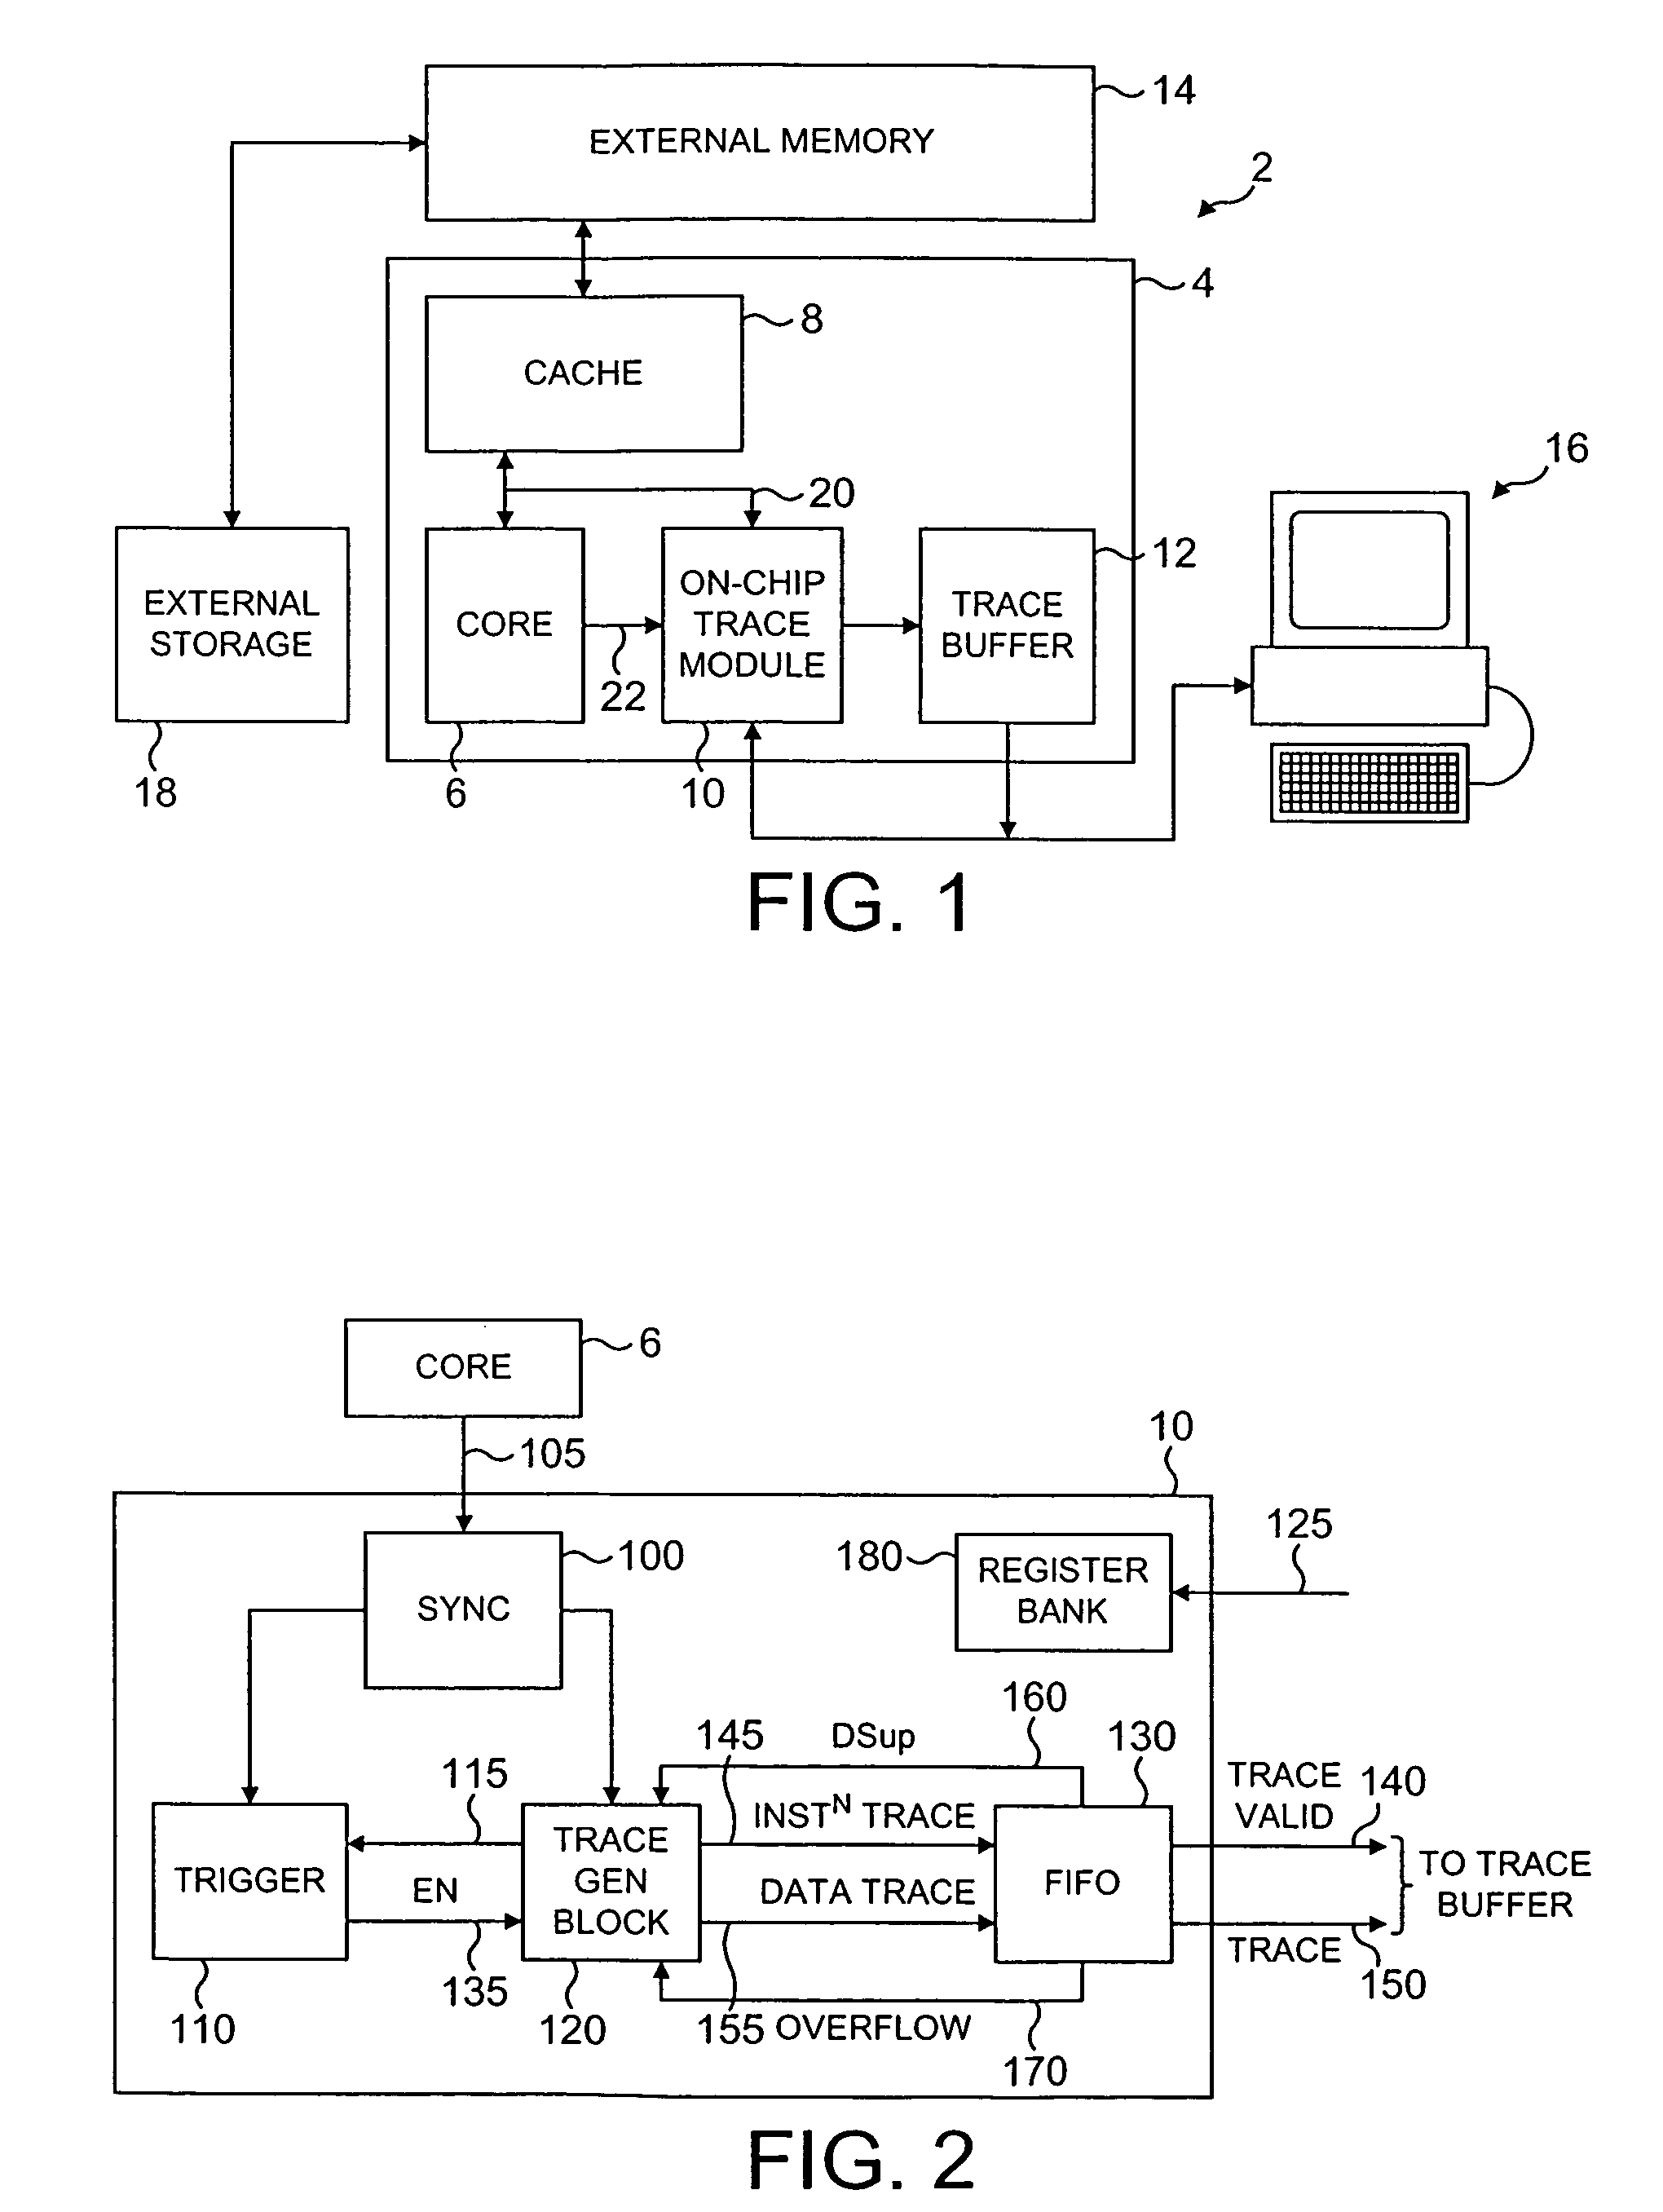 Generation of trace signals within a data processing apparatus